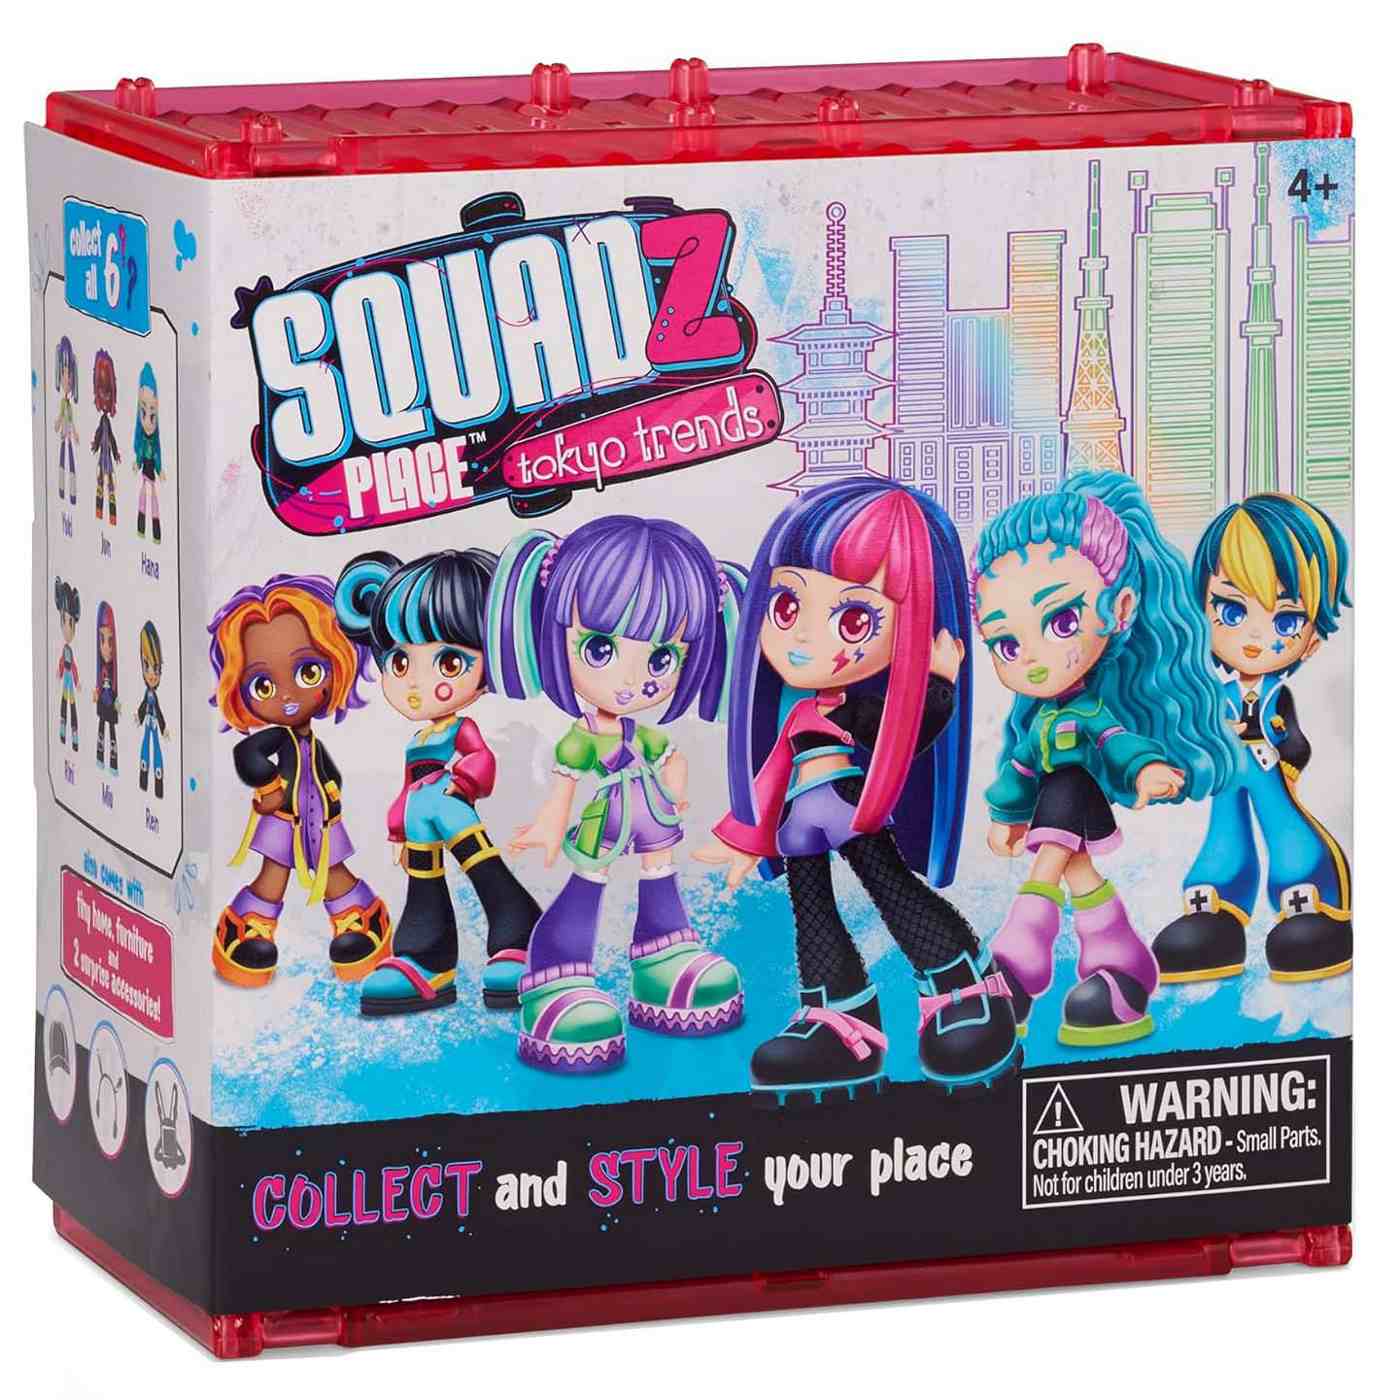 Squadz Place Tokyo Trends Collectible Doll; image 1 of 11